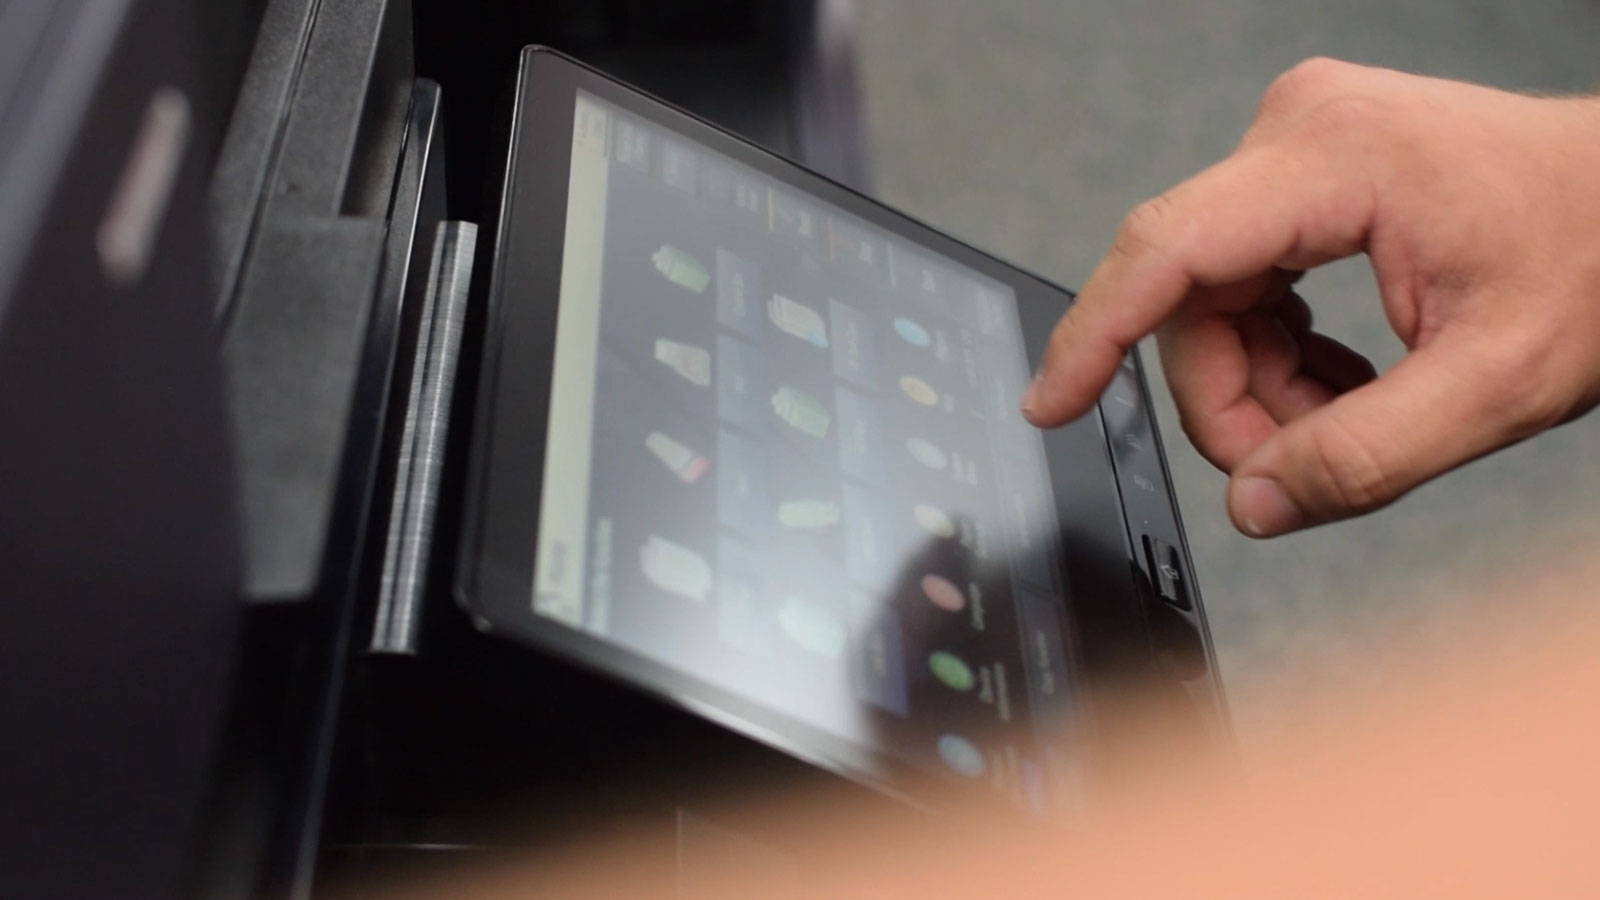 The hand of someone using the touchscreen of a copier